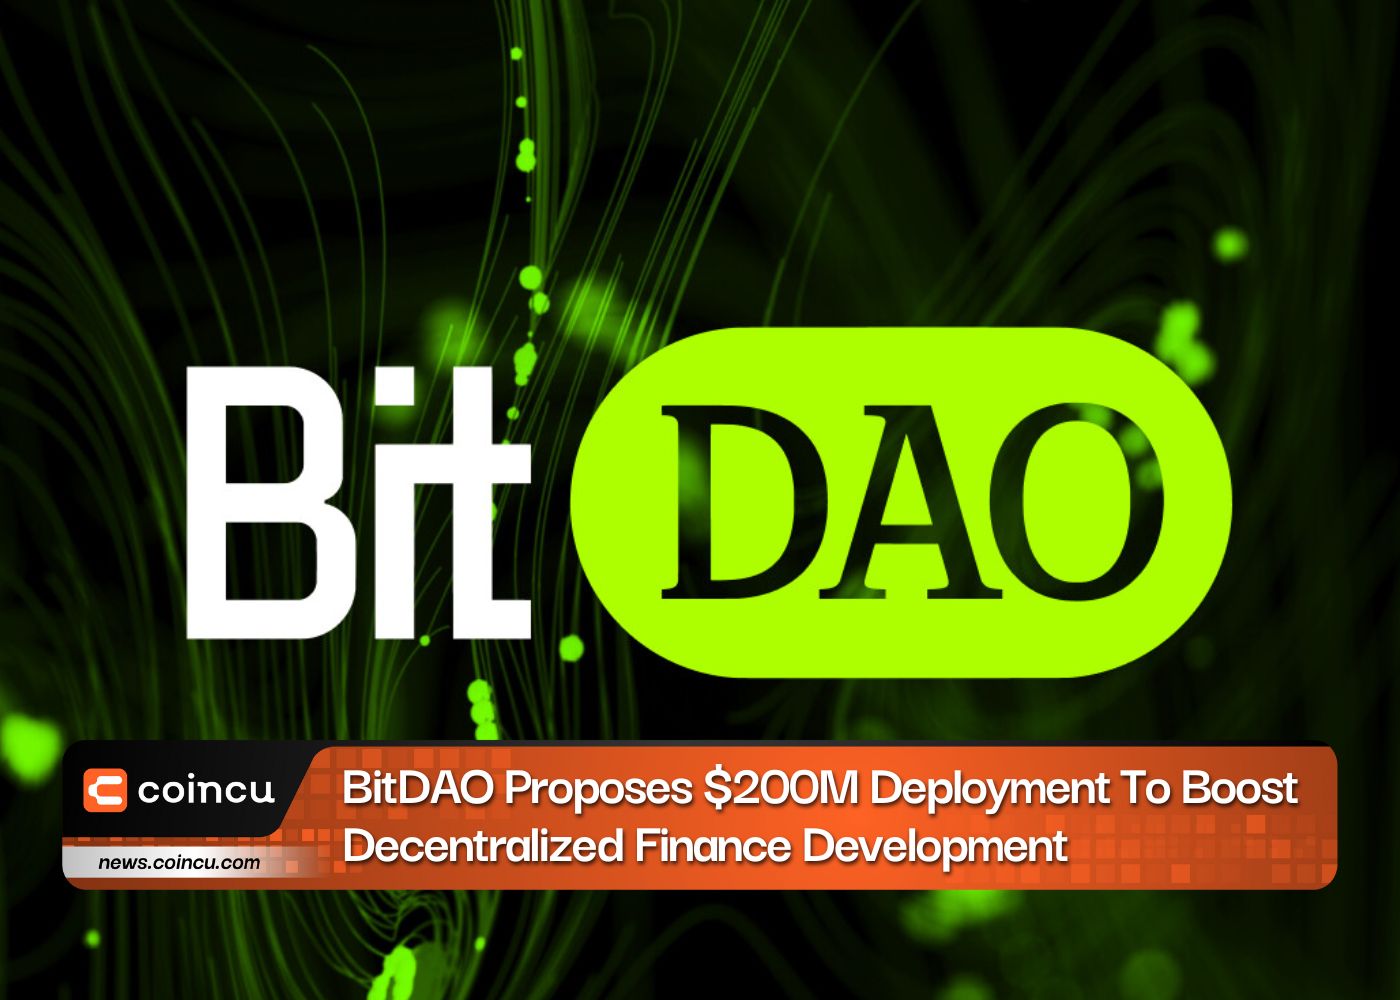 BitDAO Proposes $200M Deployment To Boost Decentralized Finance Development